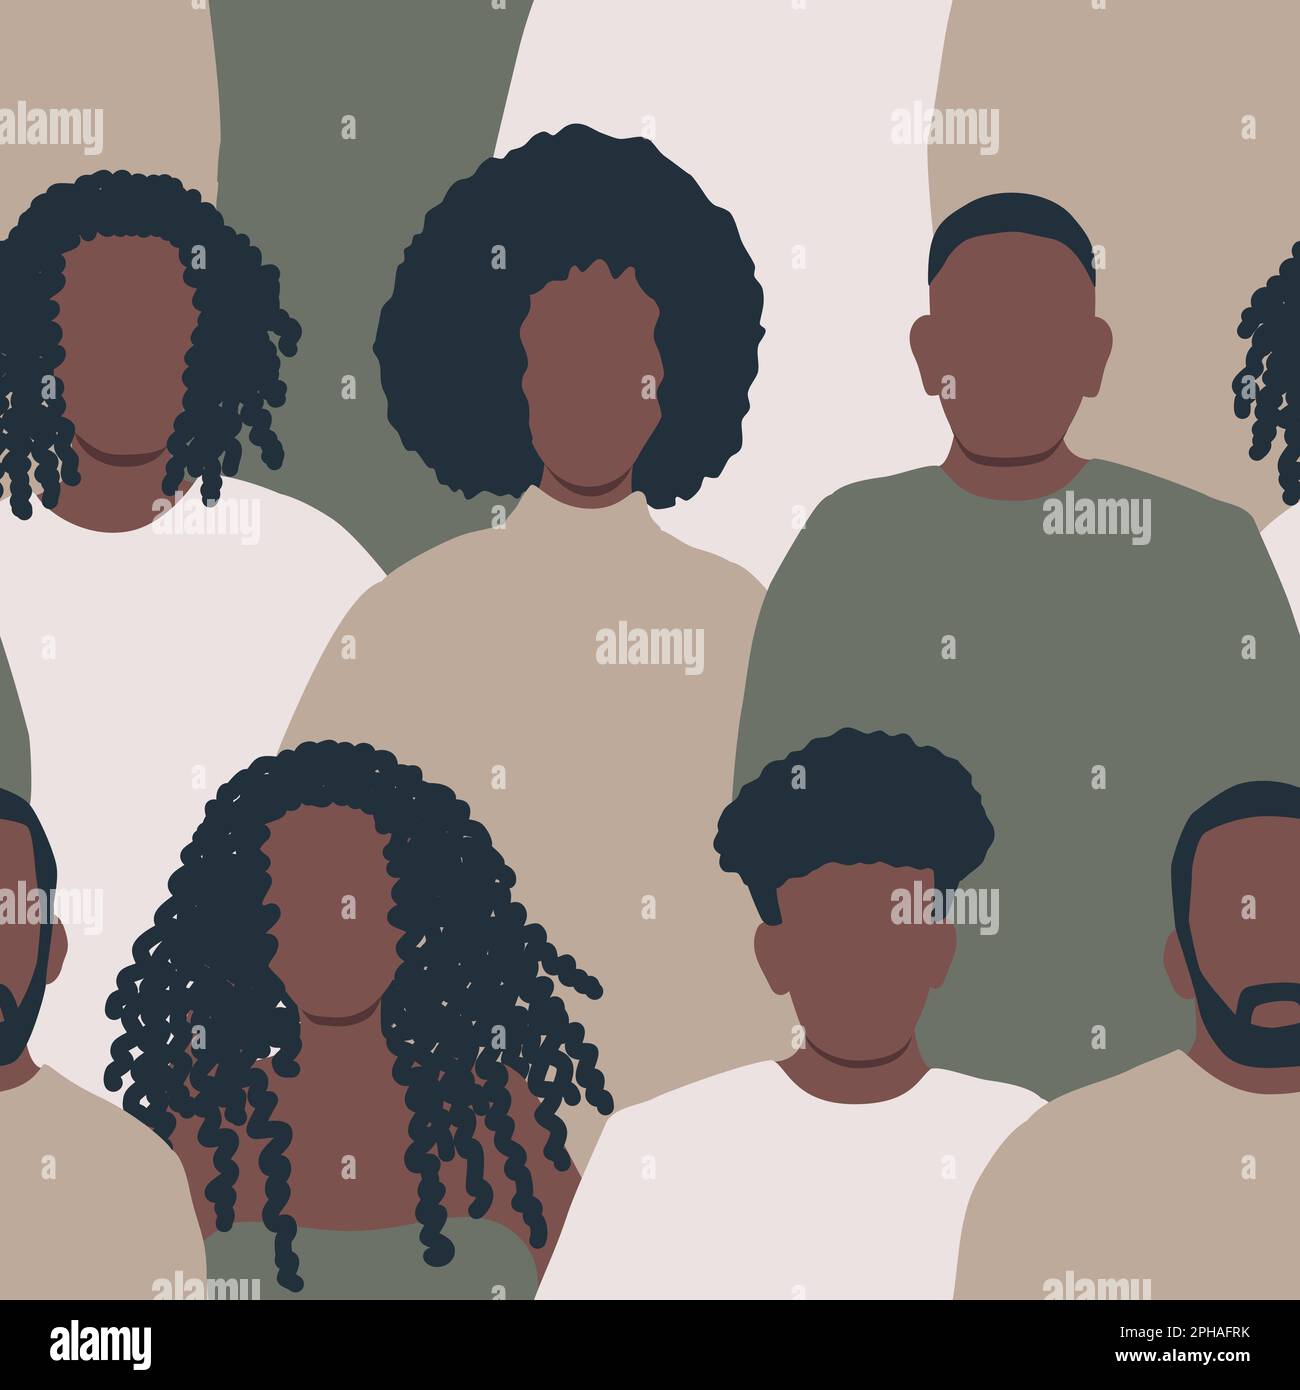 Seamless background with black people. There are silhouettes of different men and women. Pattern with people icons. Crowd. Vector illustration. Stock Vector